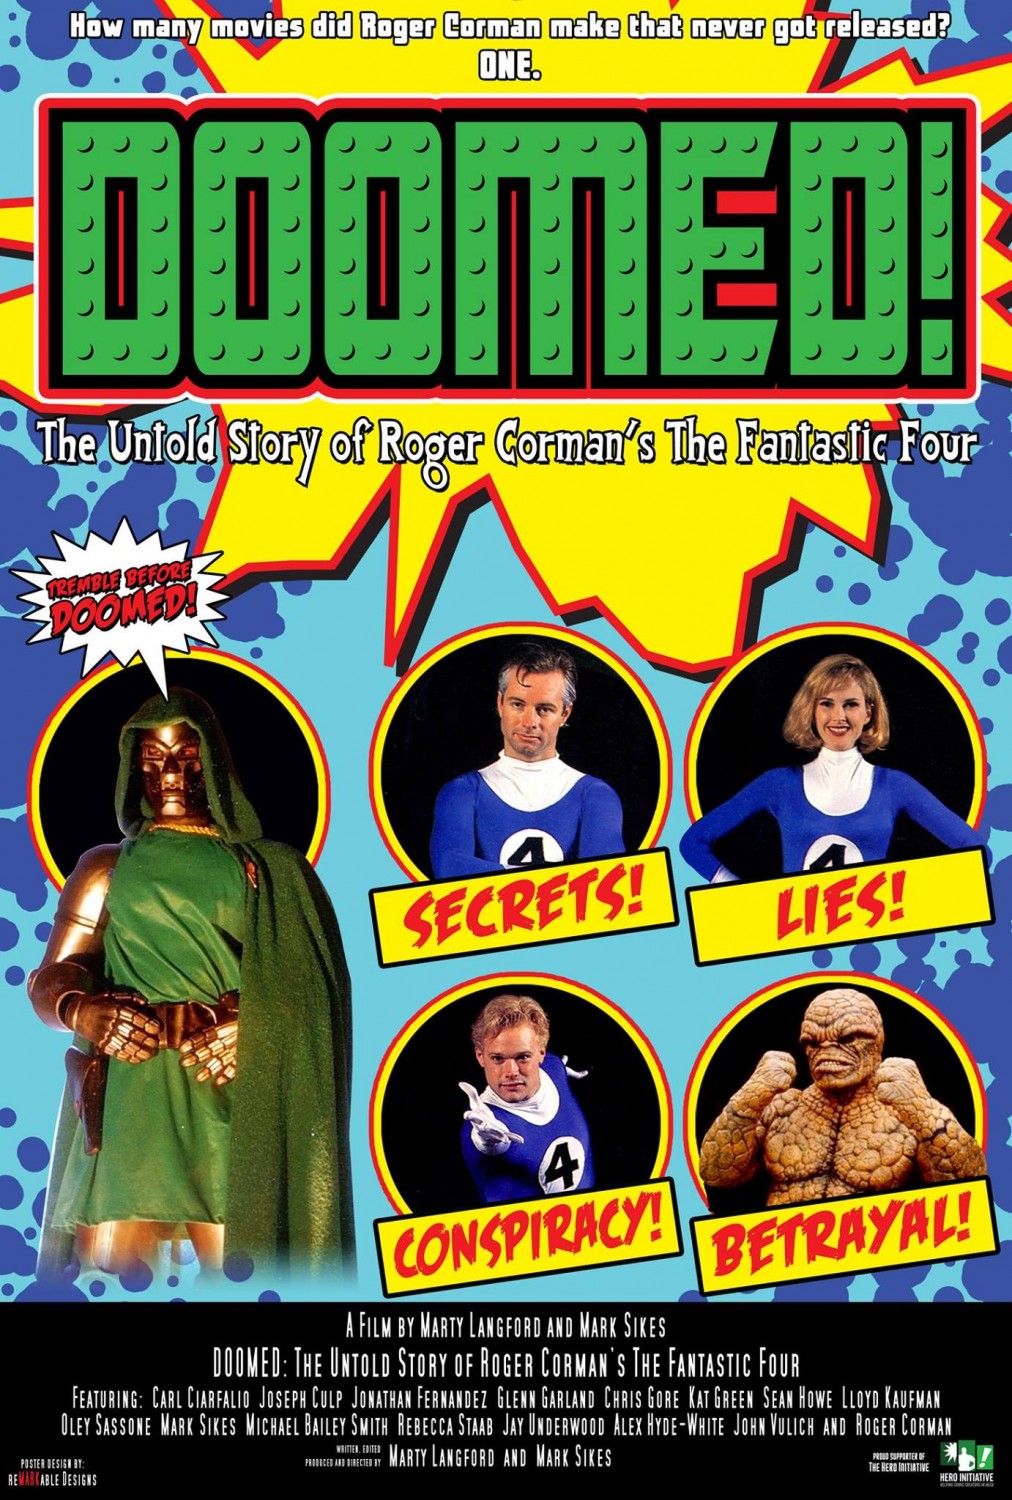 Extra Large Movie Poster Image for Doomed: The Untold Story of Roger Corman's the Fantastic Four 